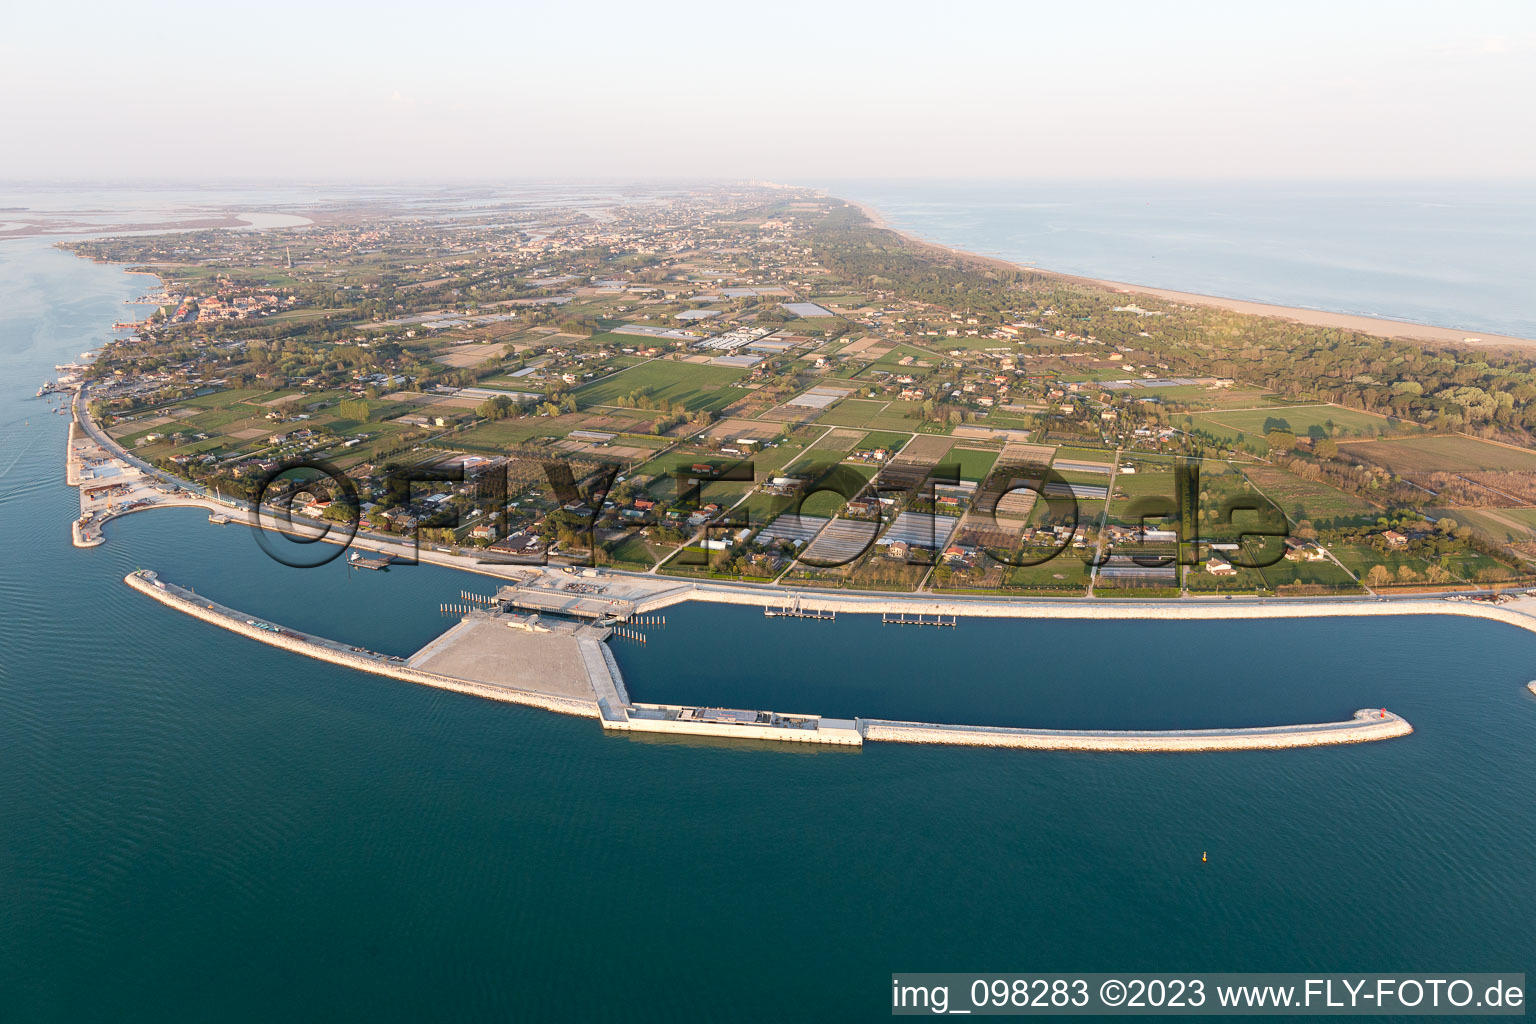 Punta Sabbioni in the state Veneto, Italy from the drone perspective